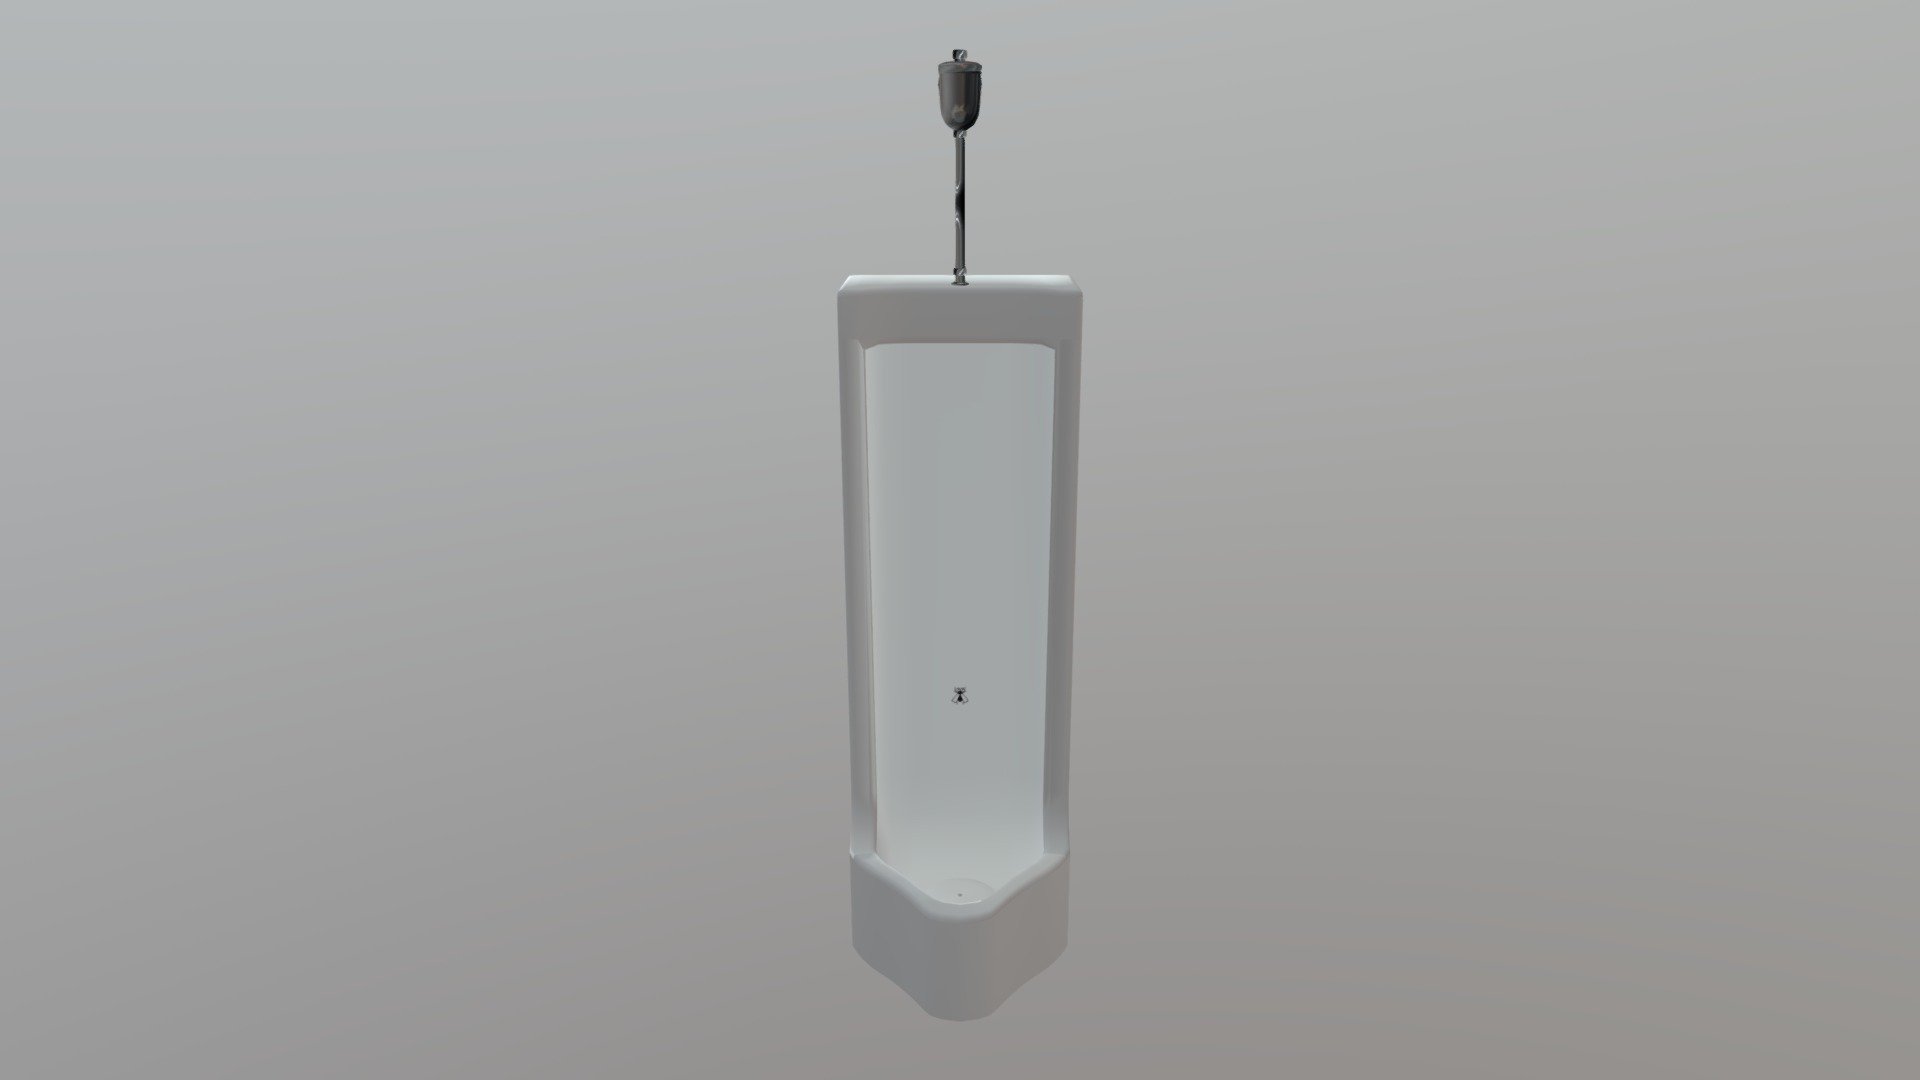 Toilet Urinal
Low-Poly Model - Urinal - Download Free 3D model by ASA21 3d model